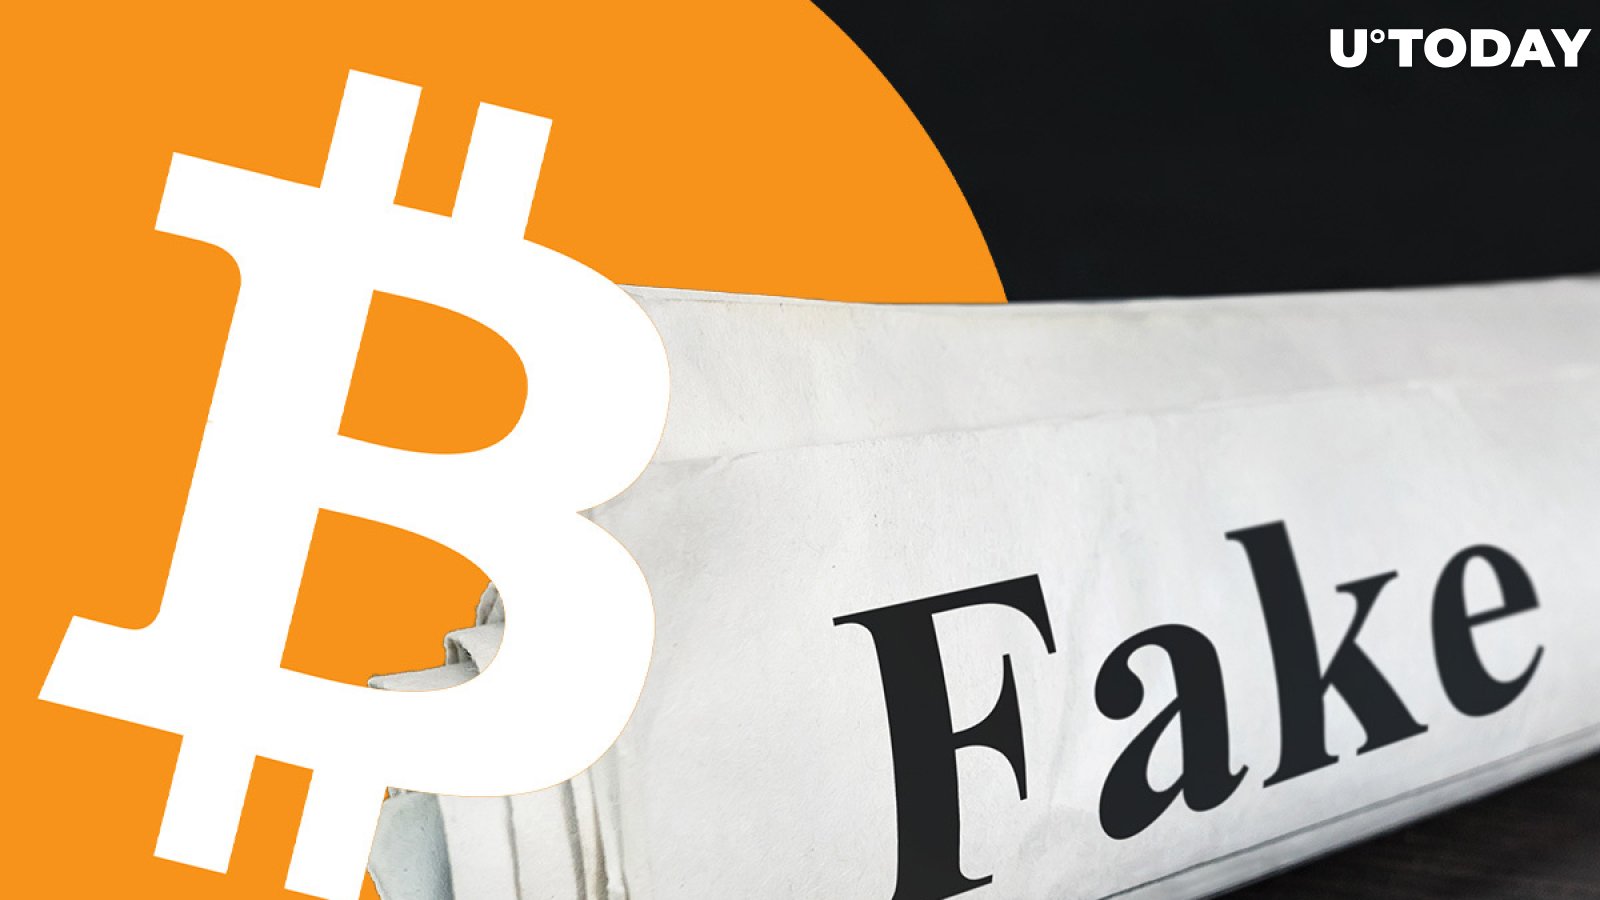 Public Company Dumps Millions Worth of Bitcoin Due to Fake Double-Spend News